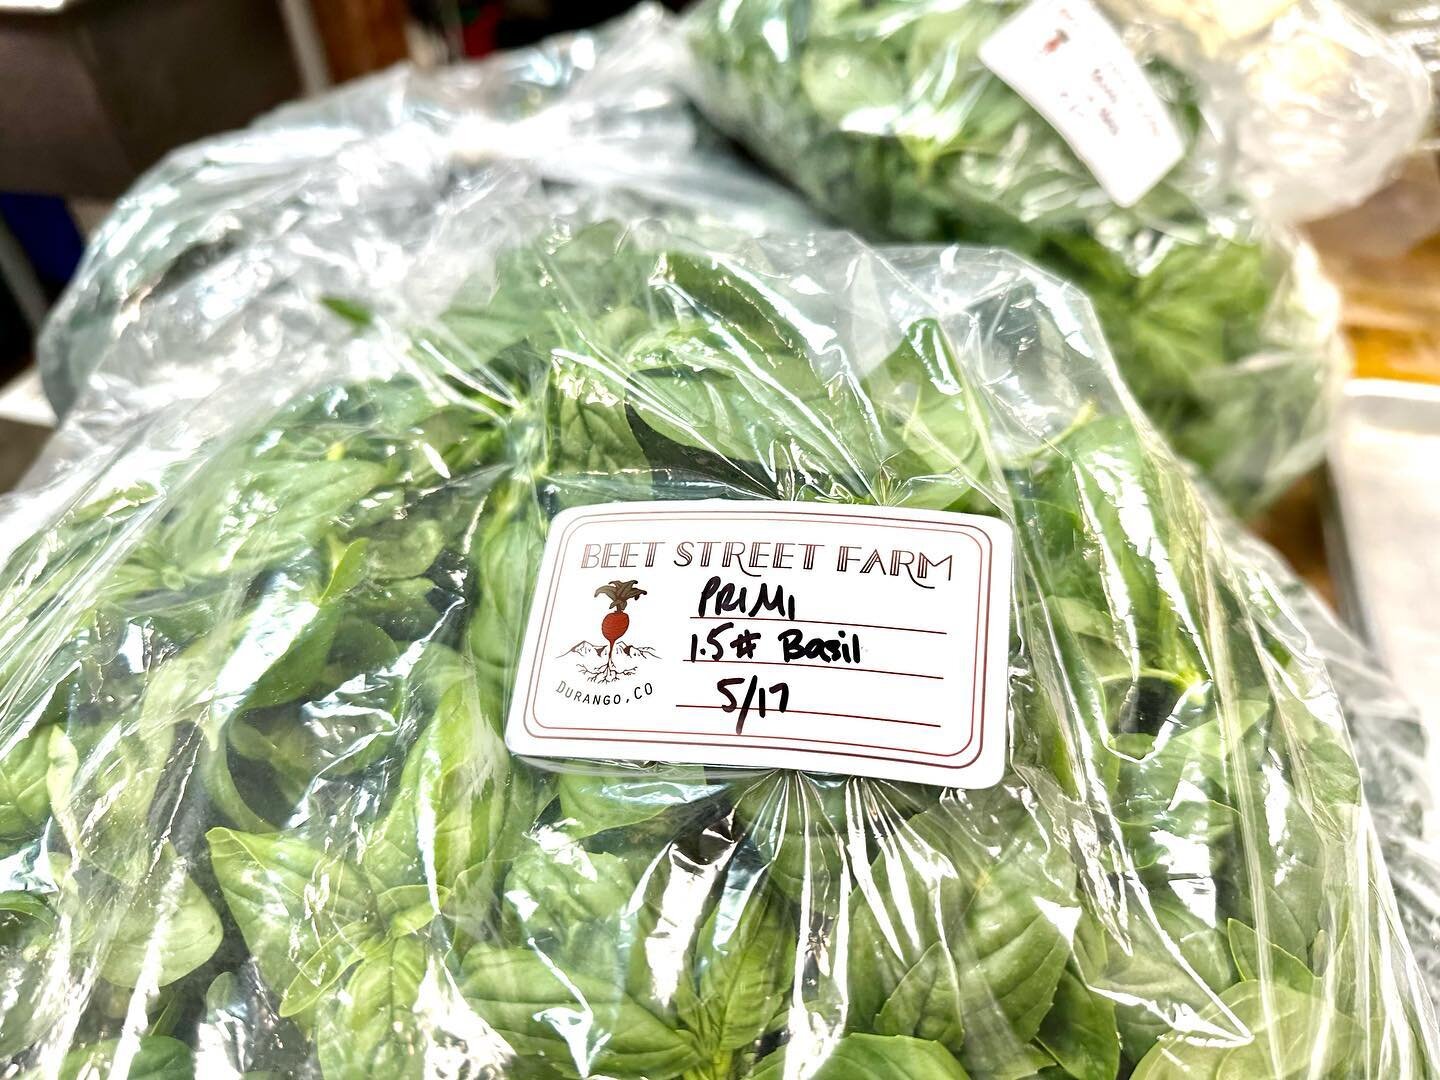 It begins! First basil of the season from @beetstreetfarm arrived yesterday. Look for pesto specials in the coming days!